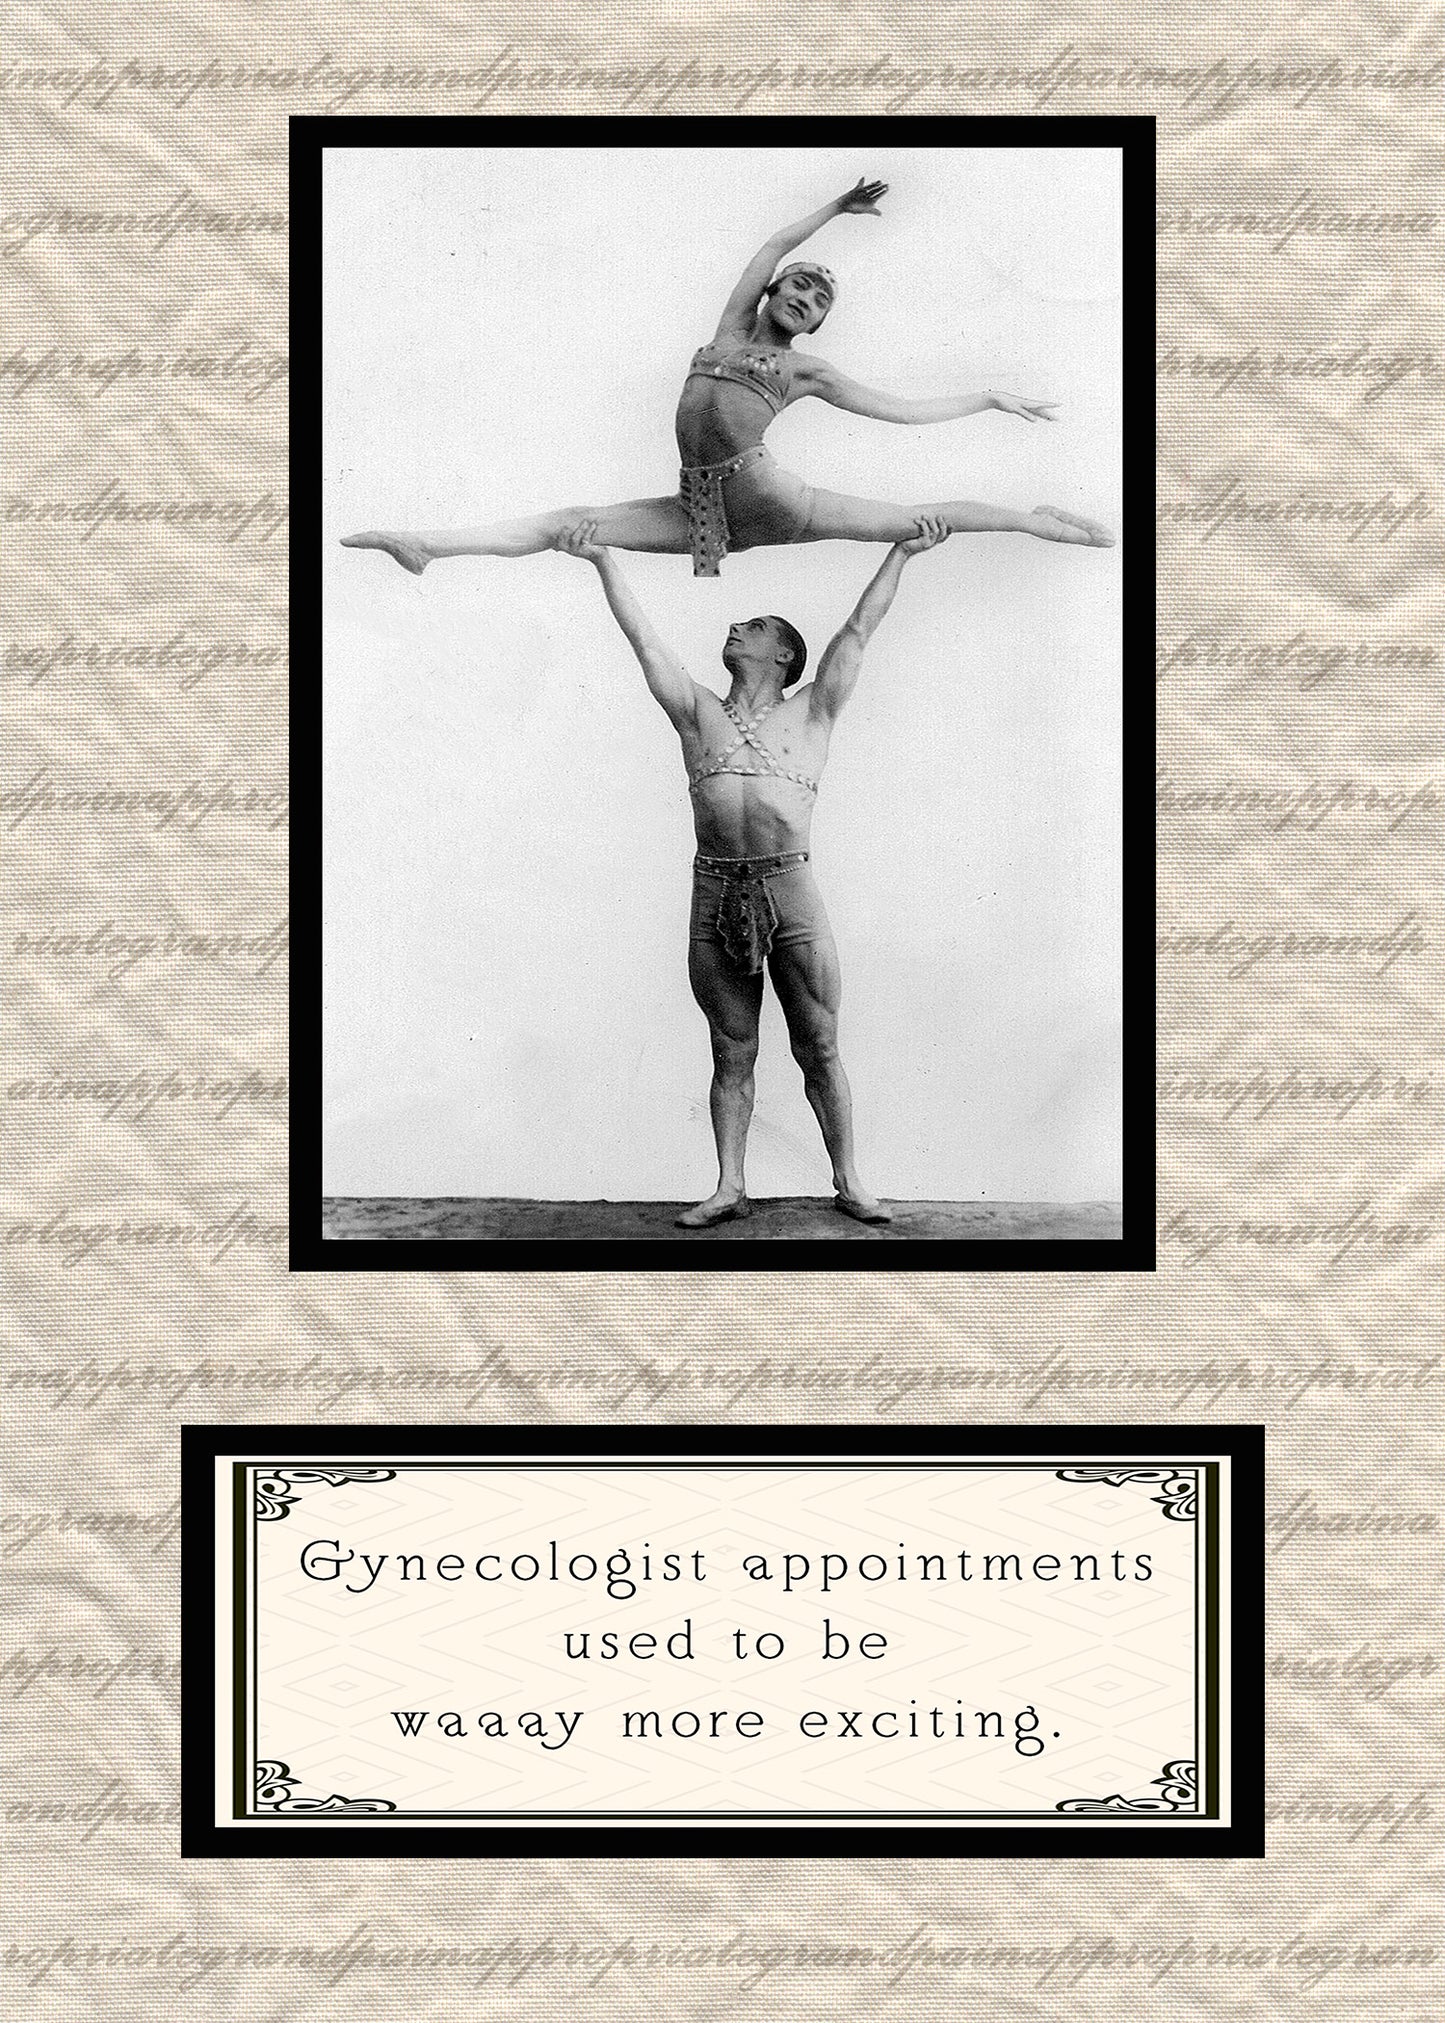 Gynecologist Appointments Used To Be Waaay More Exciting